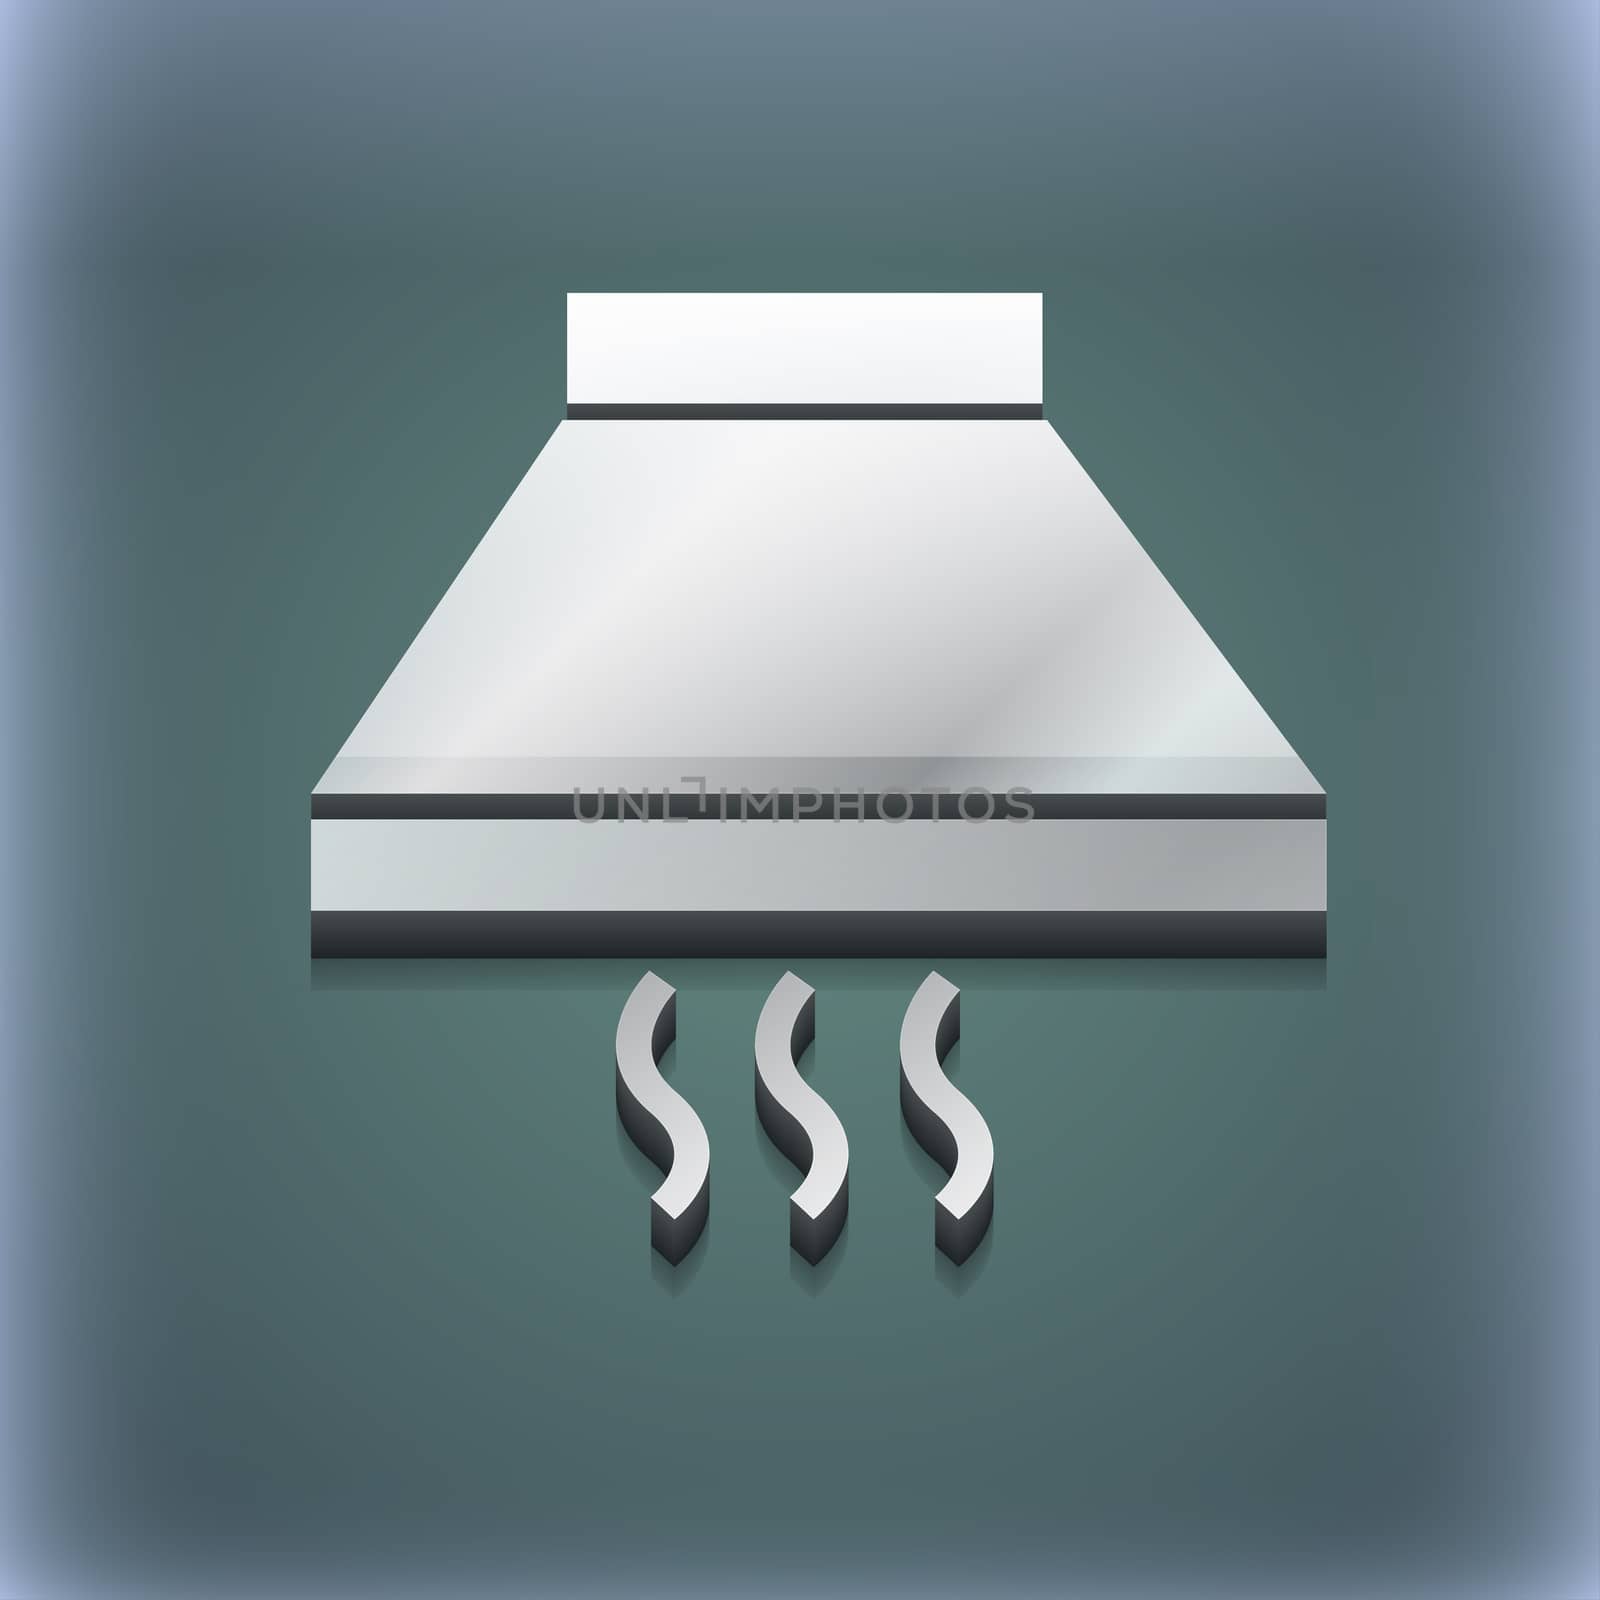 Kitchen hood icon symbol. 3D style. Trendy, modern design with space for your text illustration. Raster version